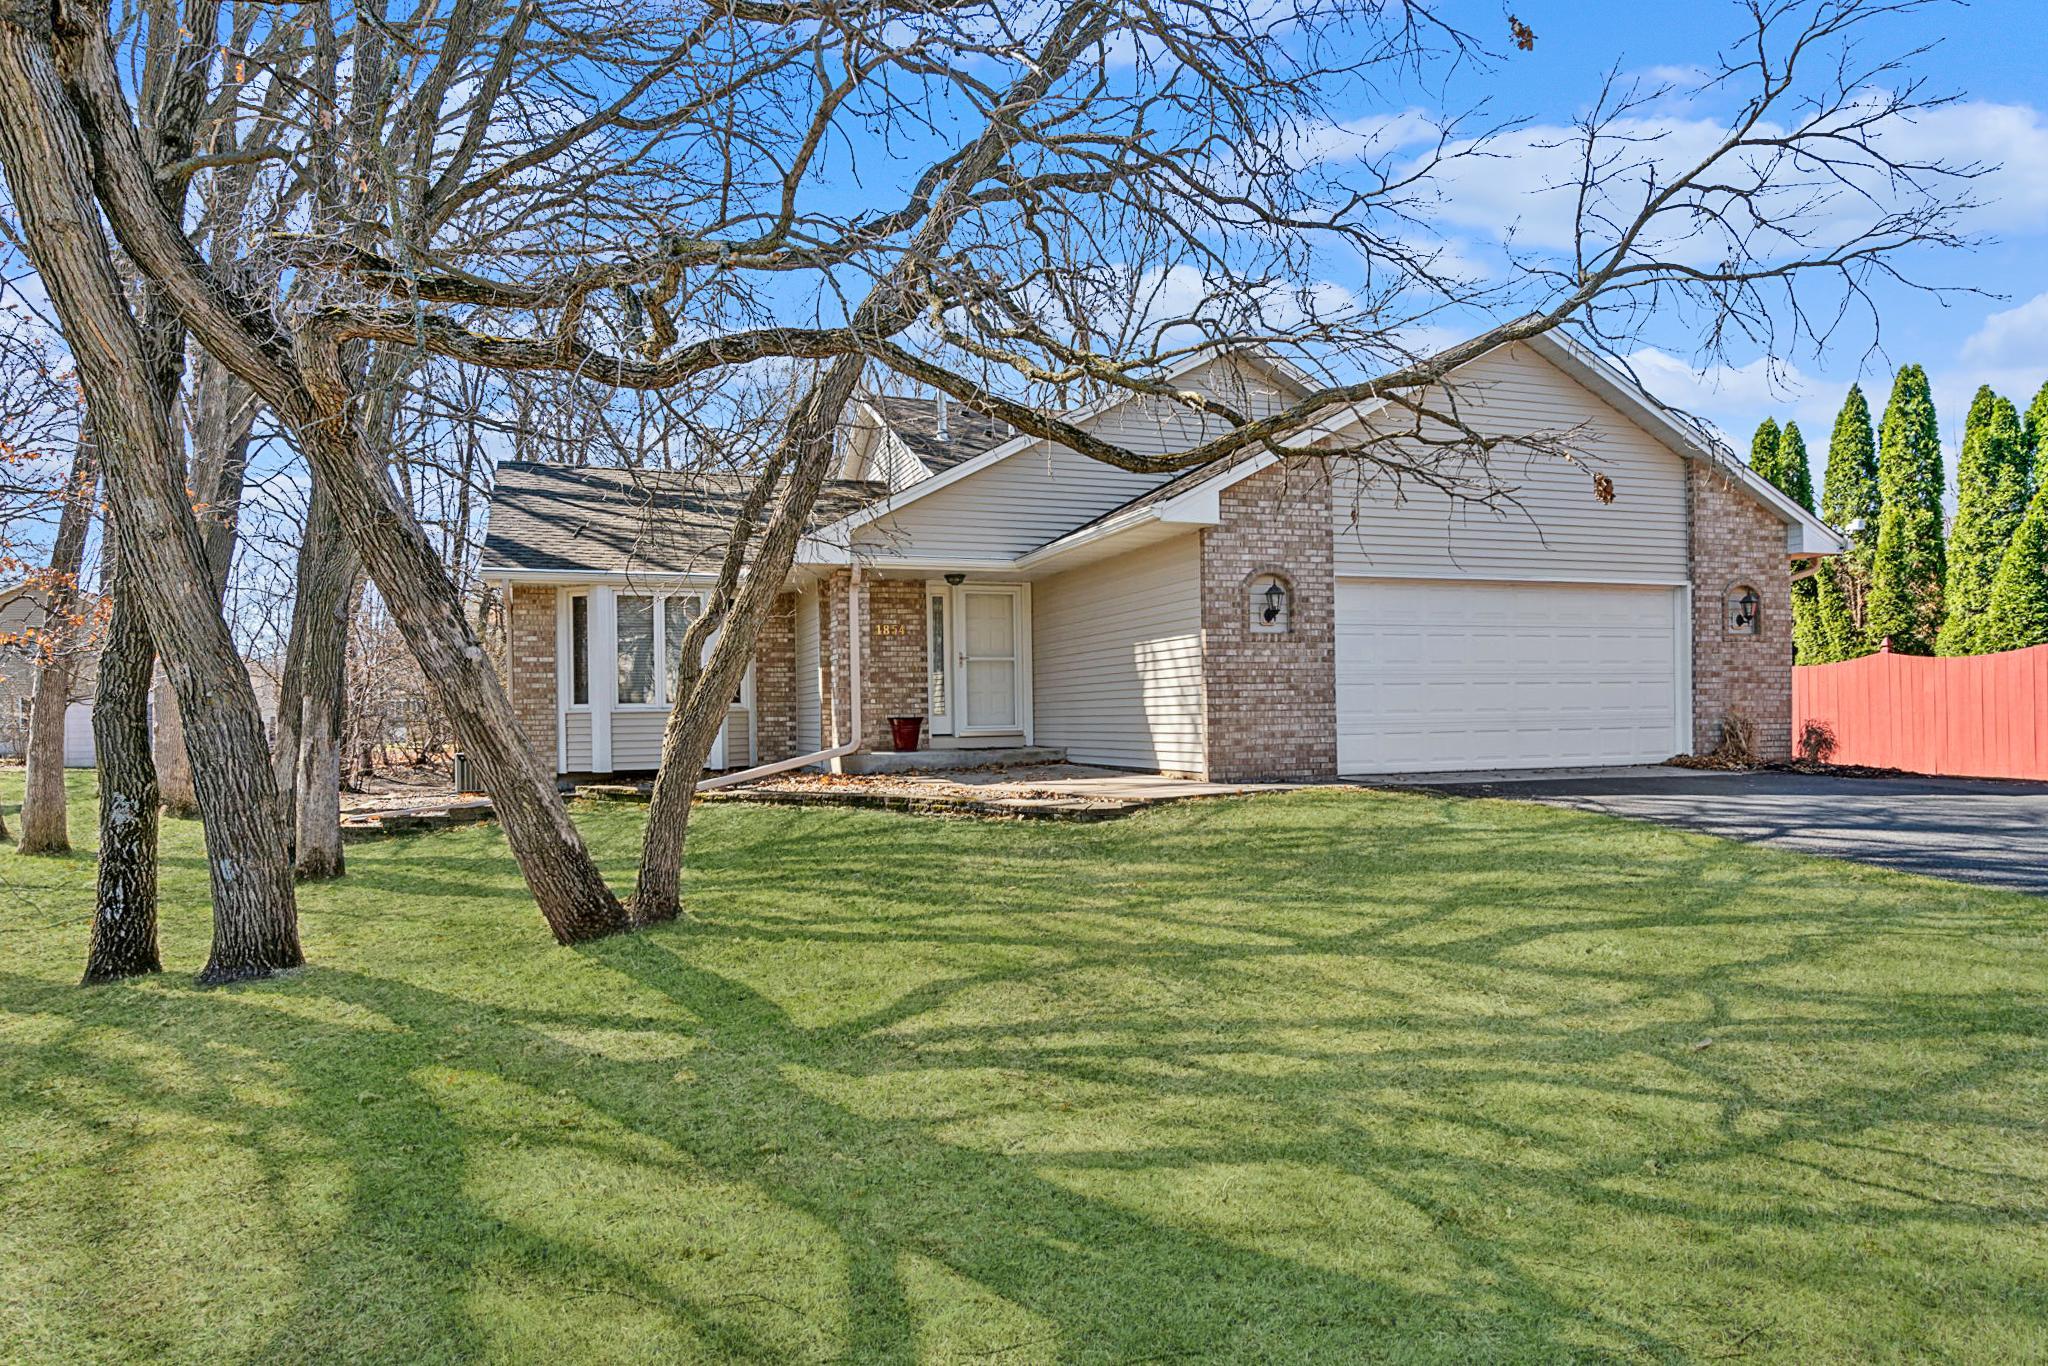 Welcome to this beautiful 4 bedroom 3 bathroom home in Blaine!